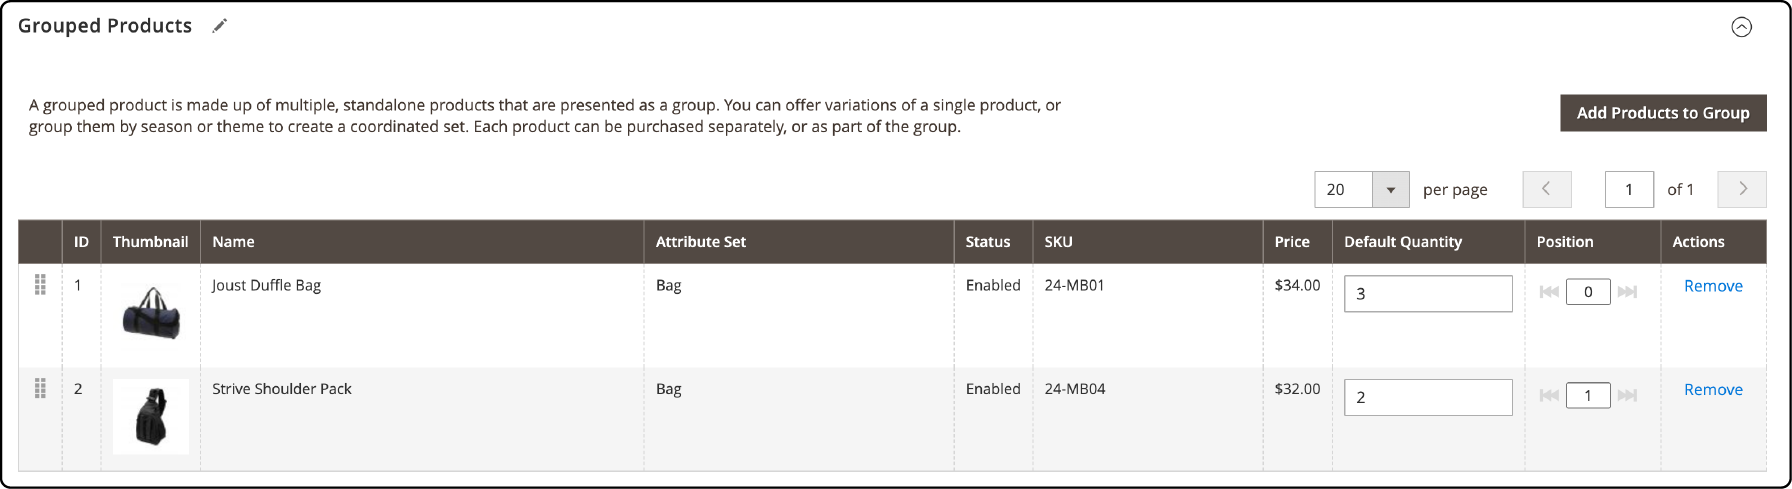 Setting Quantity and Position of Products in Magento 2 Group